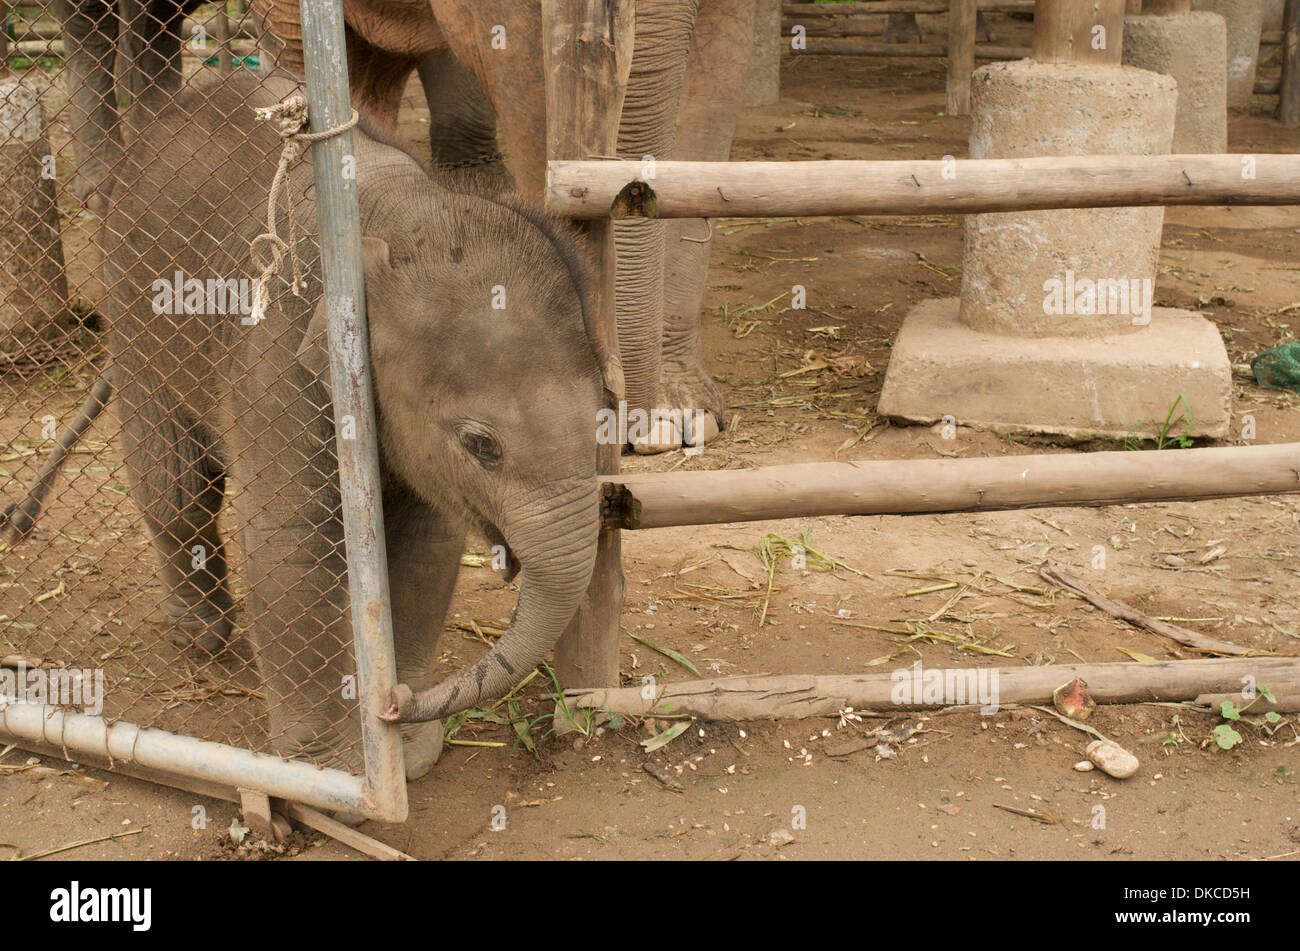 Baby elephant ventures out at Elephant Nature Park, Thailand Stock Photo